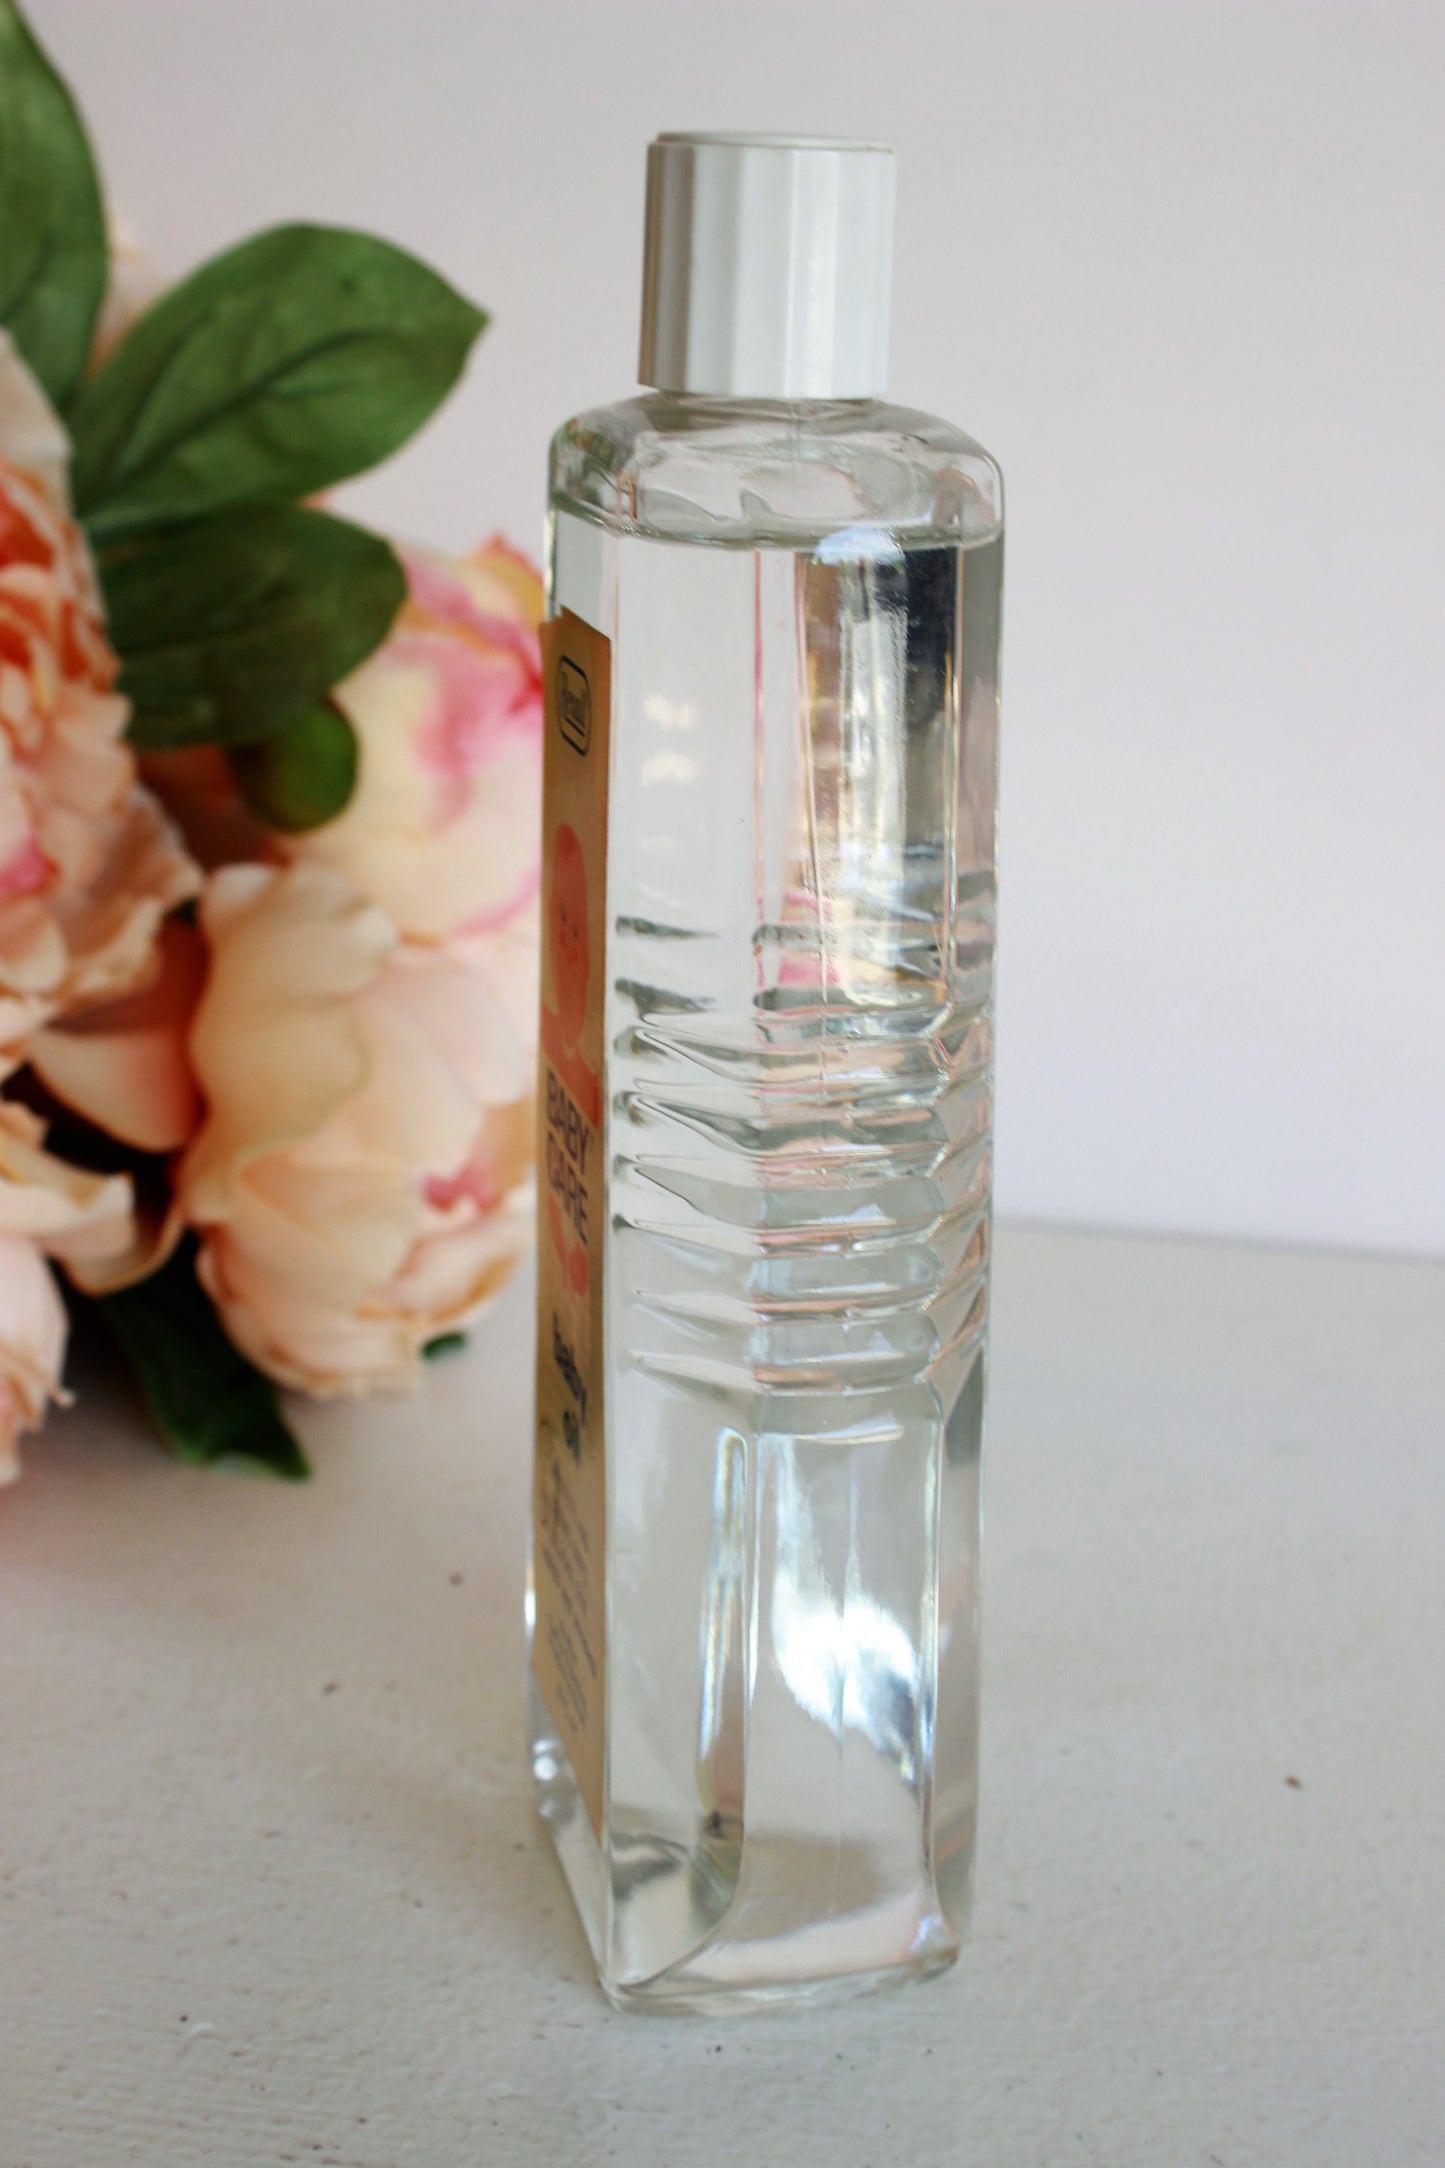 Vintage Rexall Baby Oil in Glass Bottle